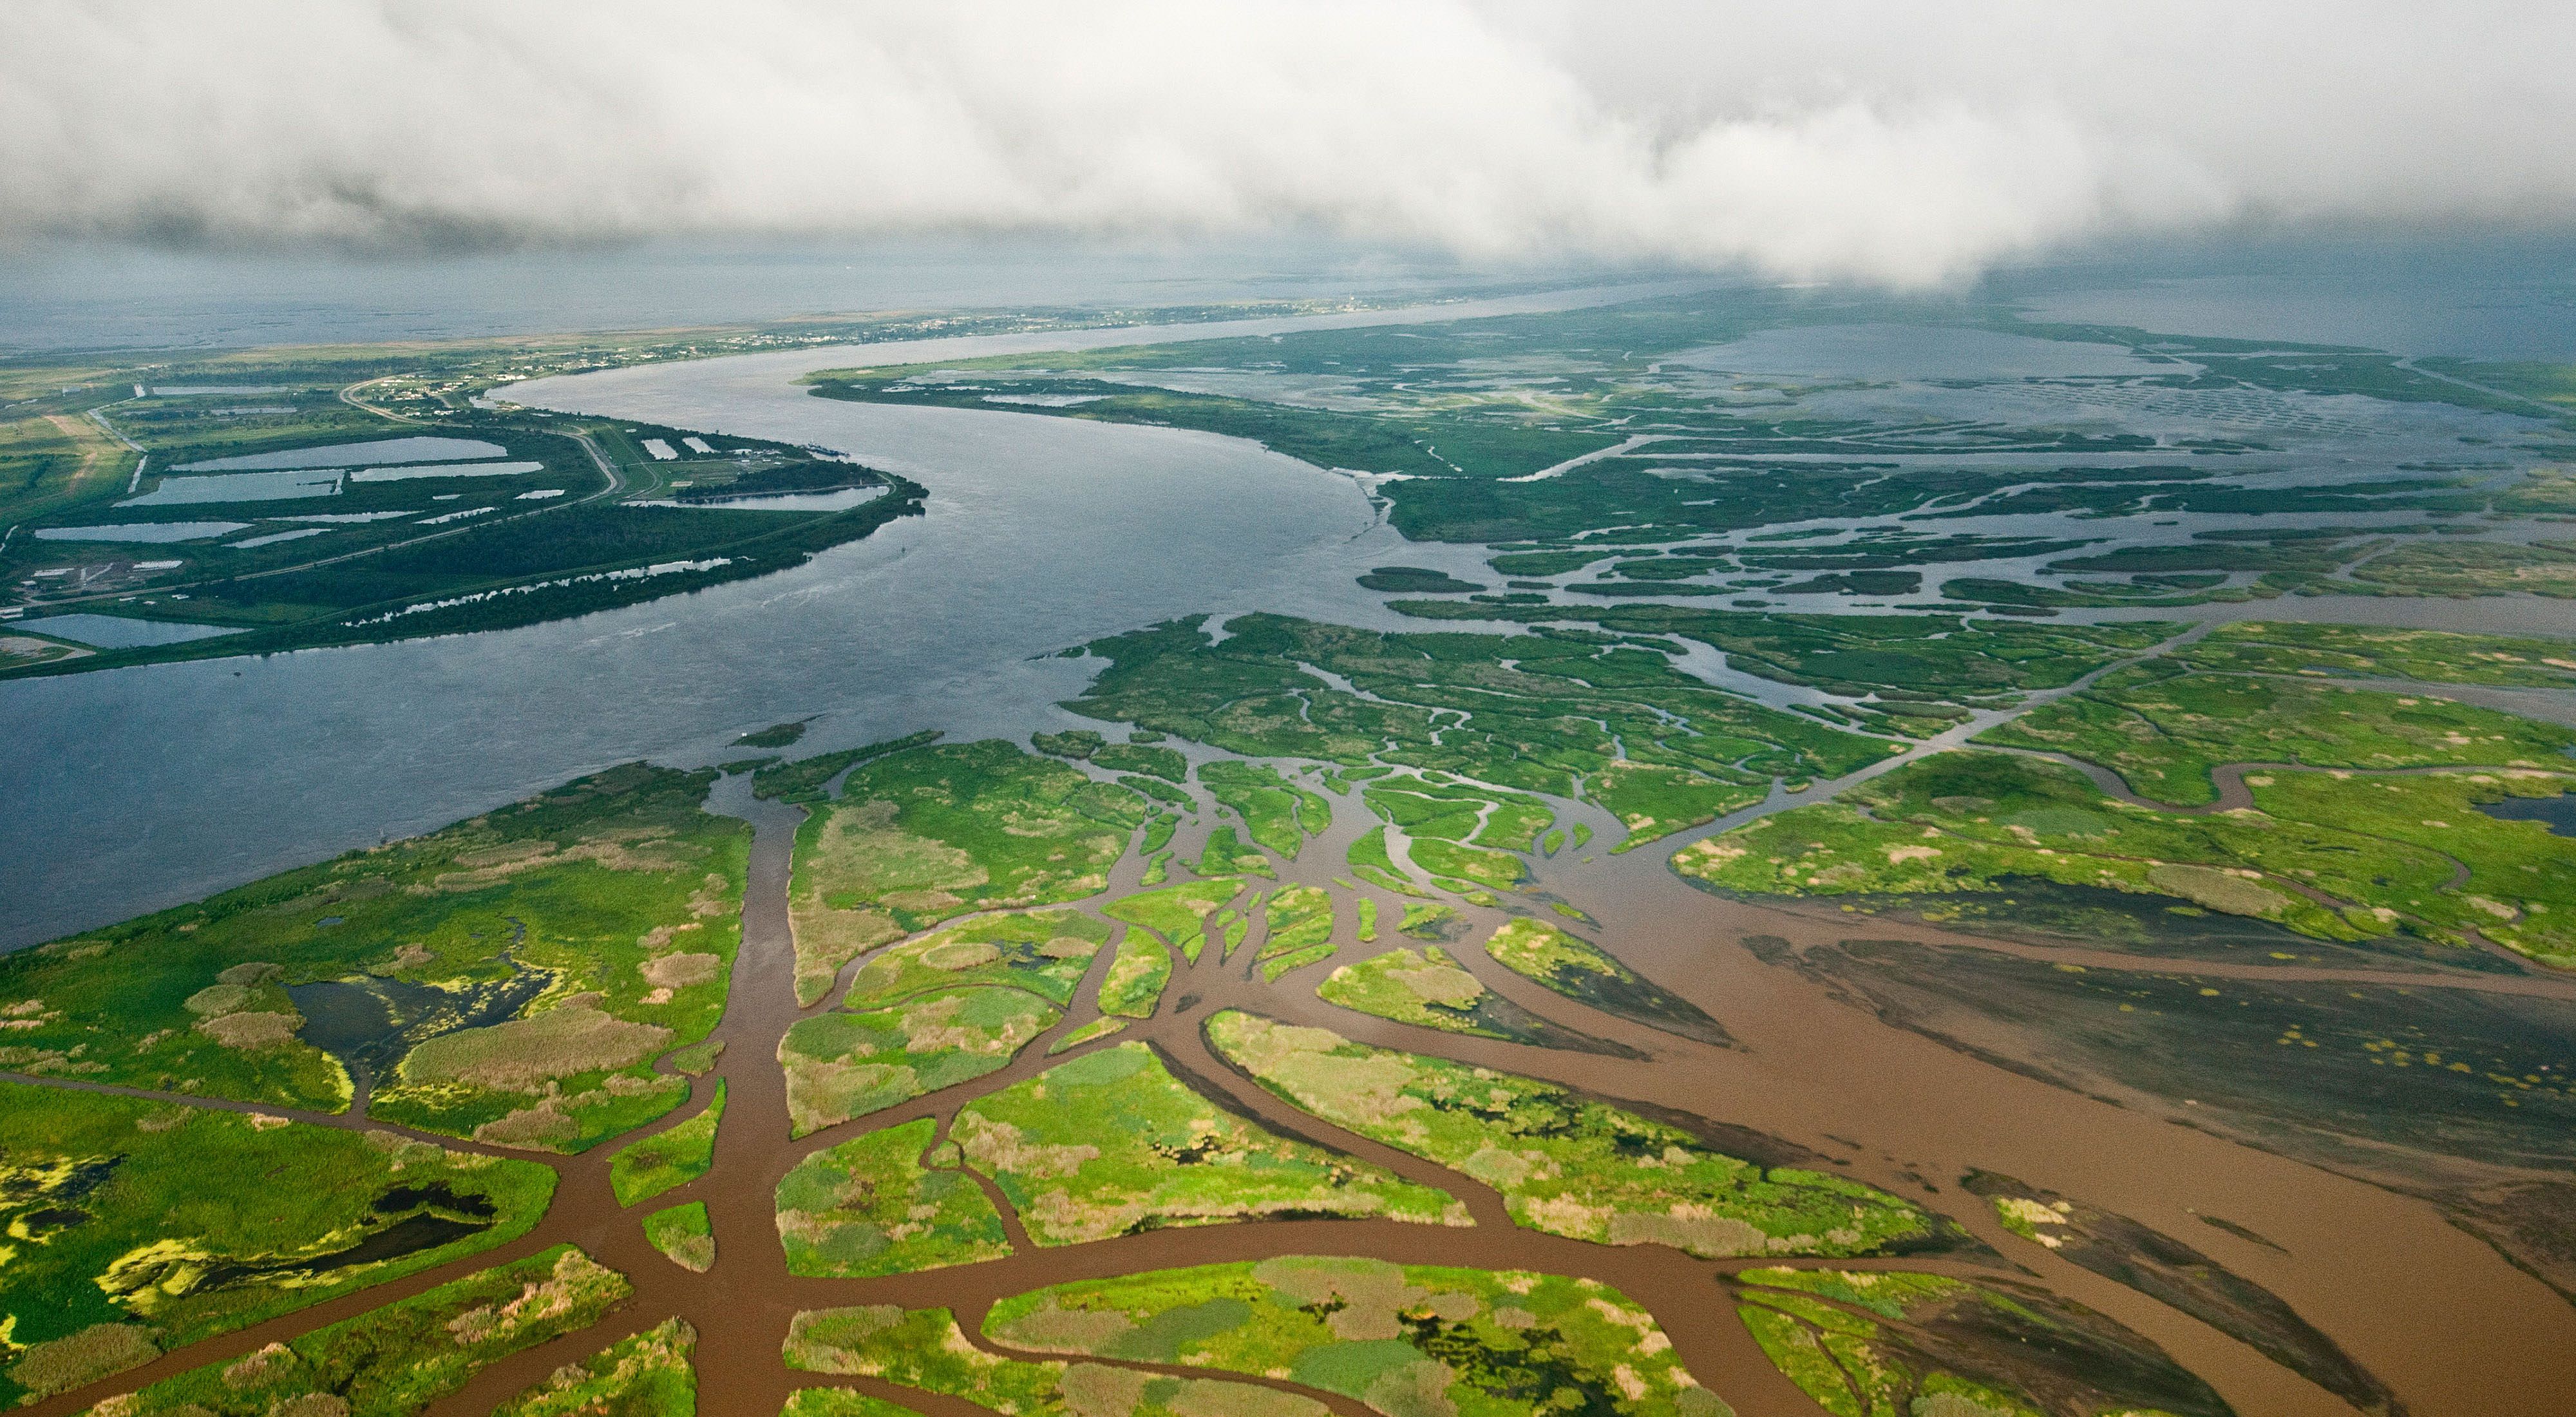 Aerial view of the Mississippi River delta near New Orleans.